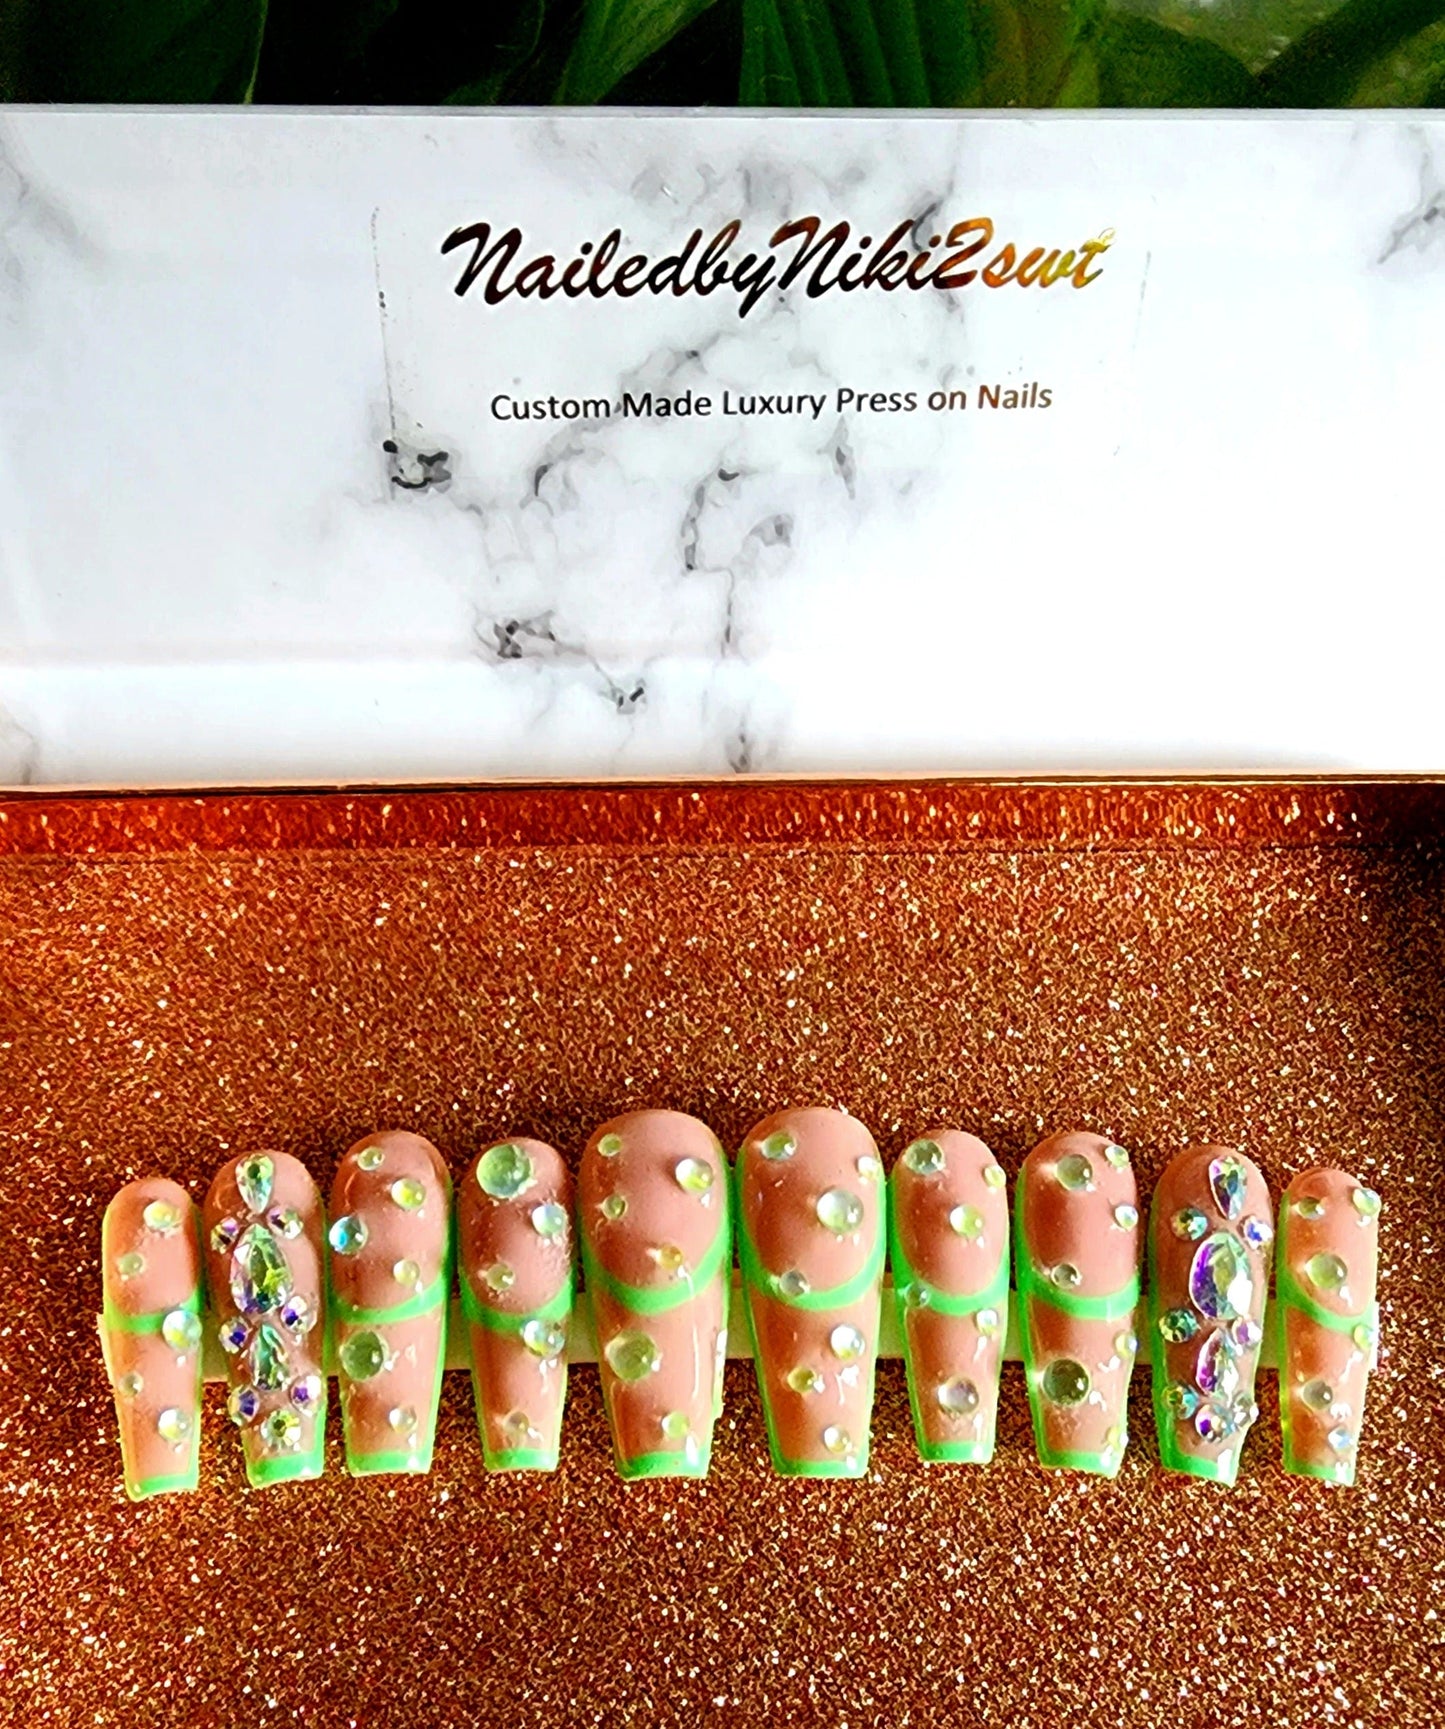 NailedByNiki2swt Beauty and Nails Drizzle - Ready to ship Press on Nails Self Care Accessories